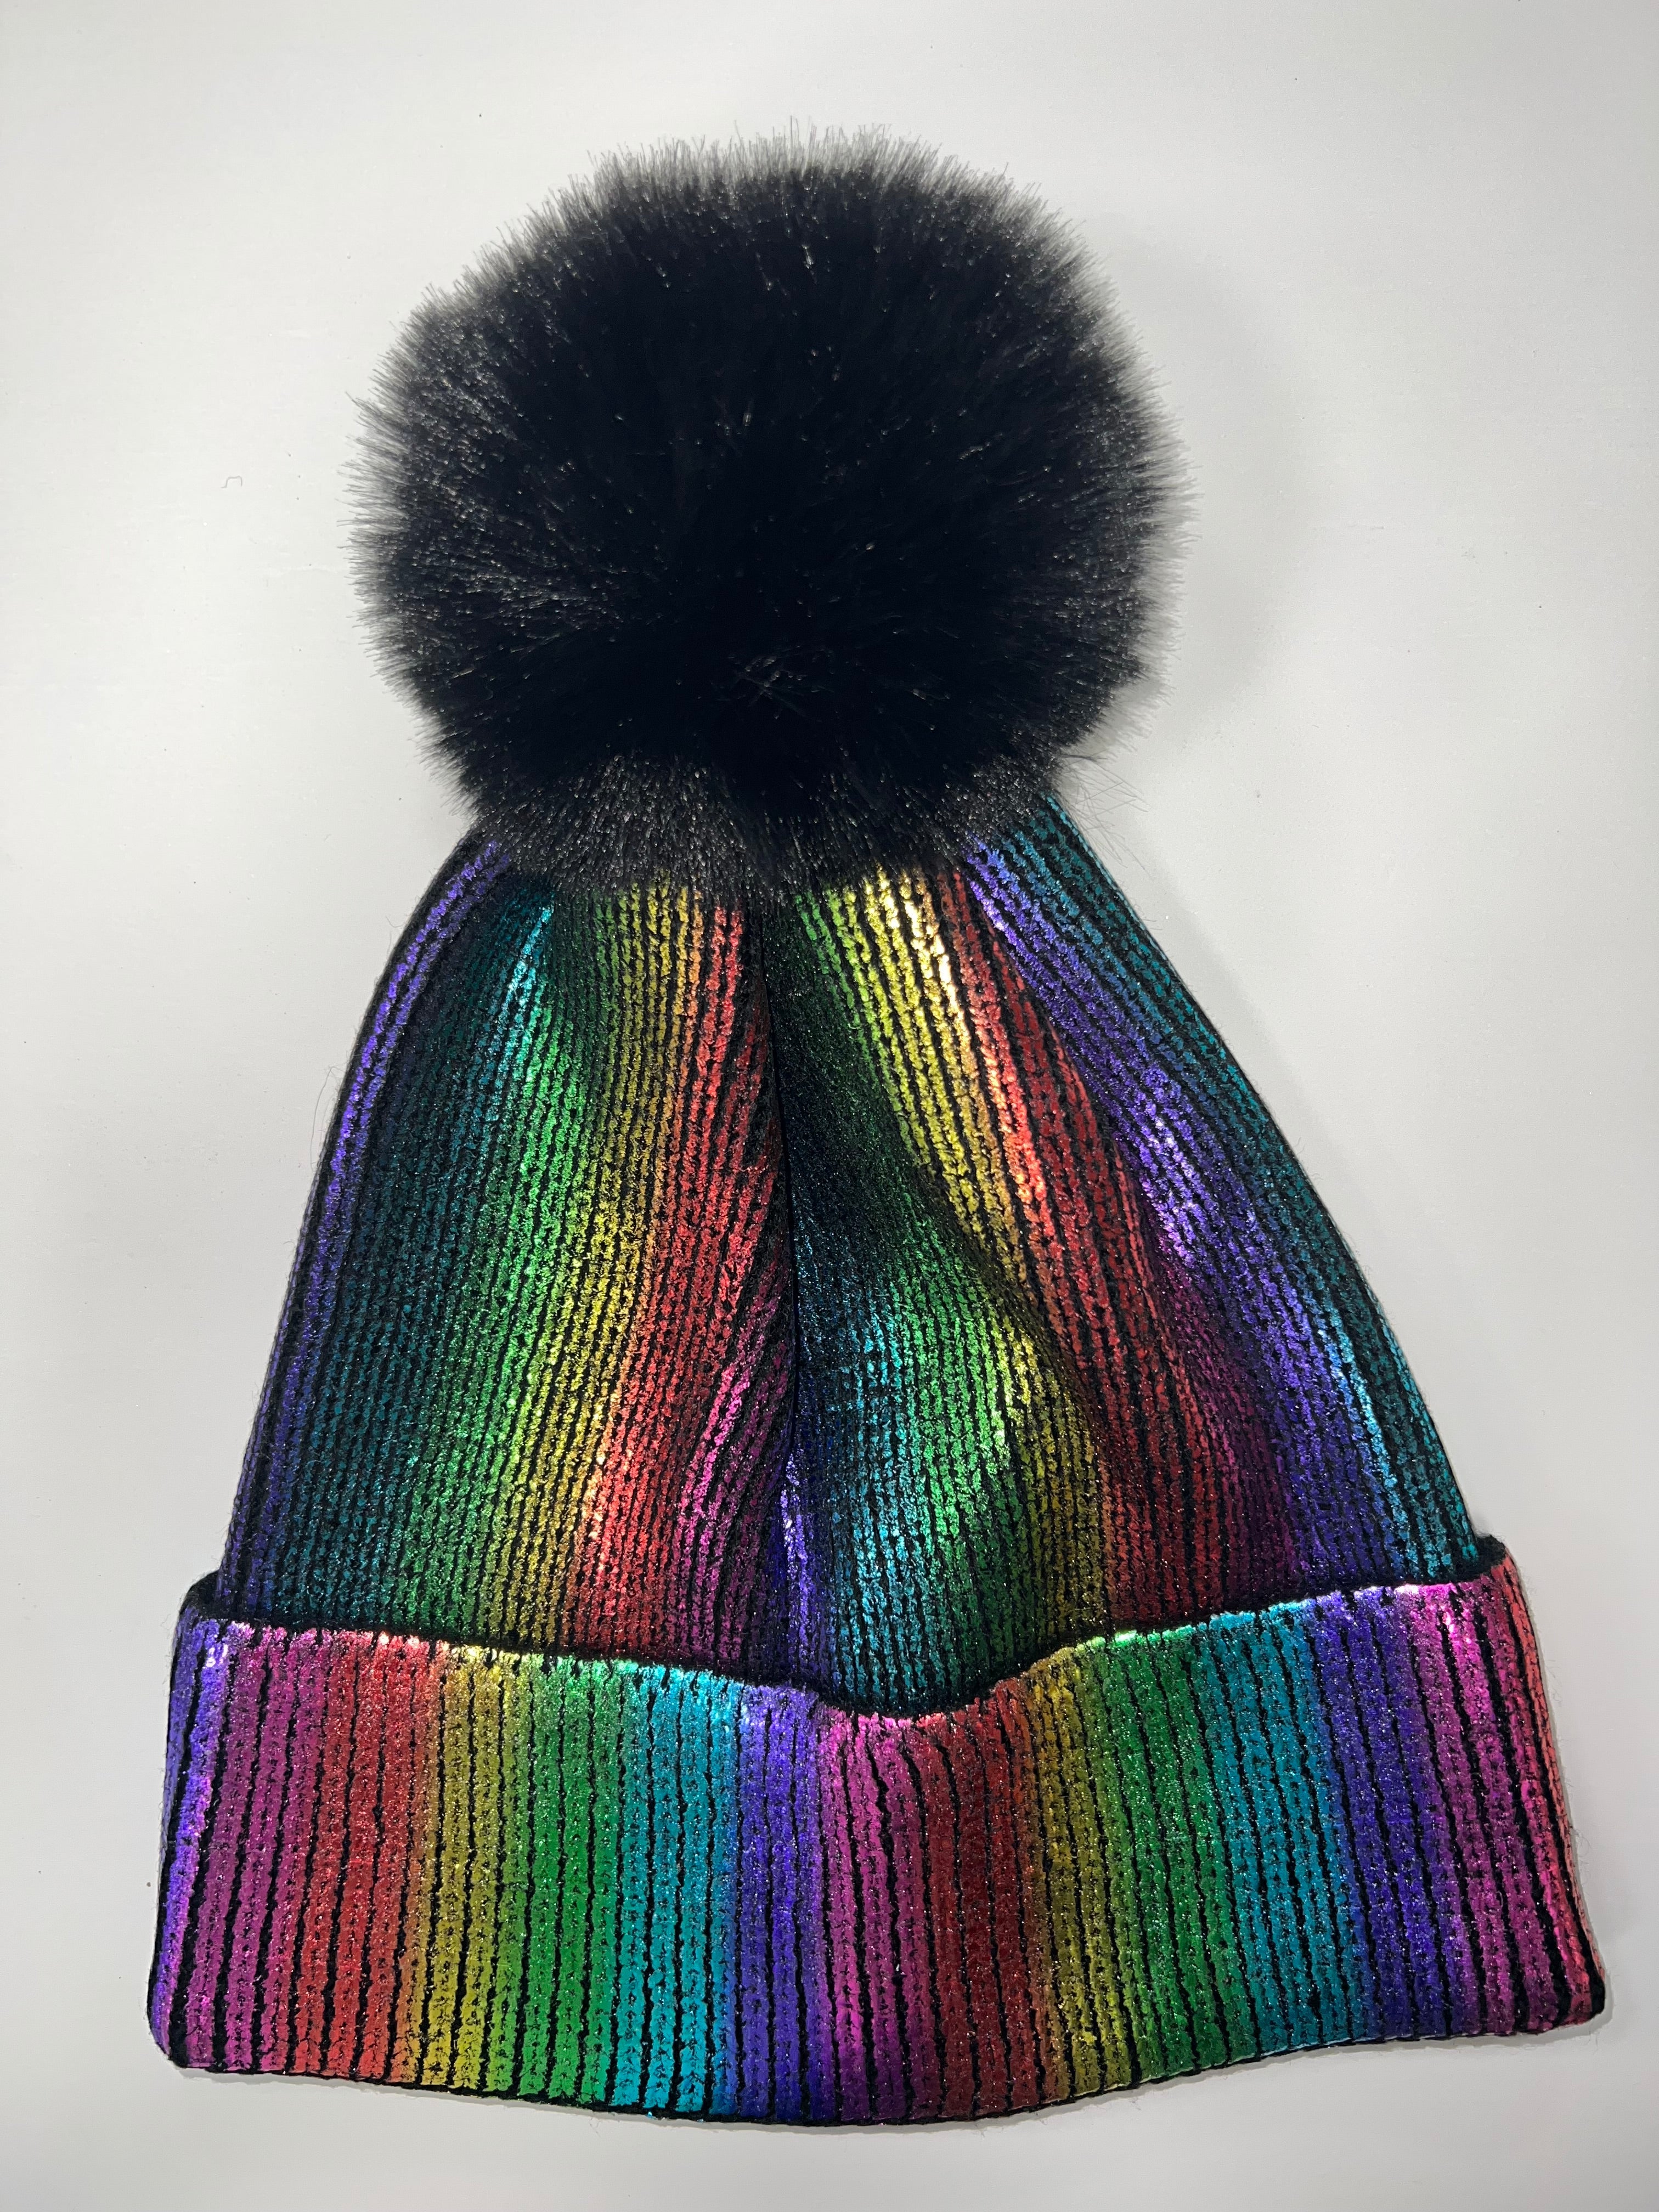 The Pom Pom Winter Hat  - Rainbow Letters / Initials